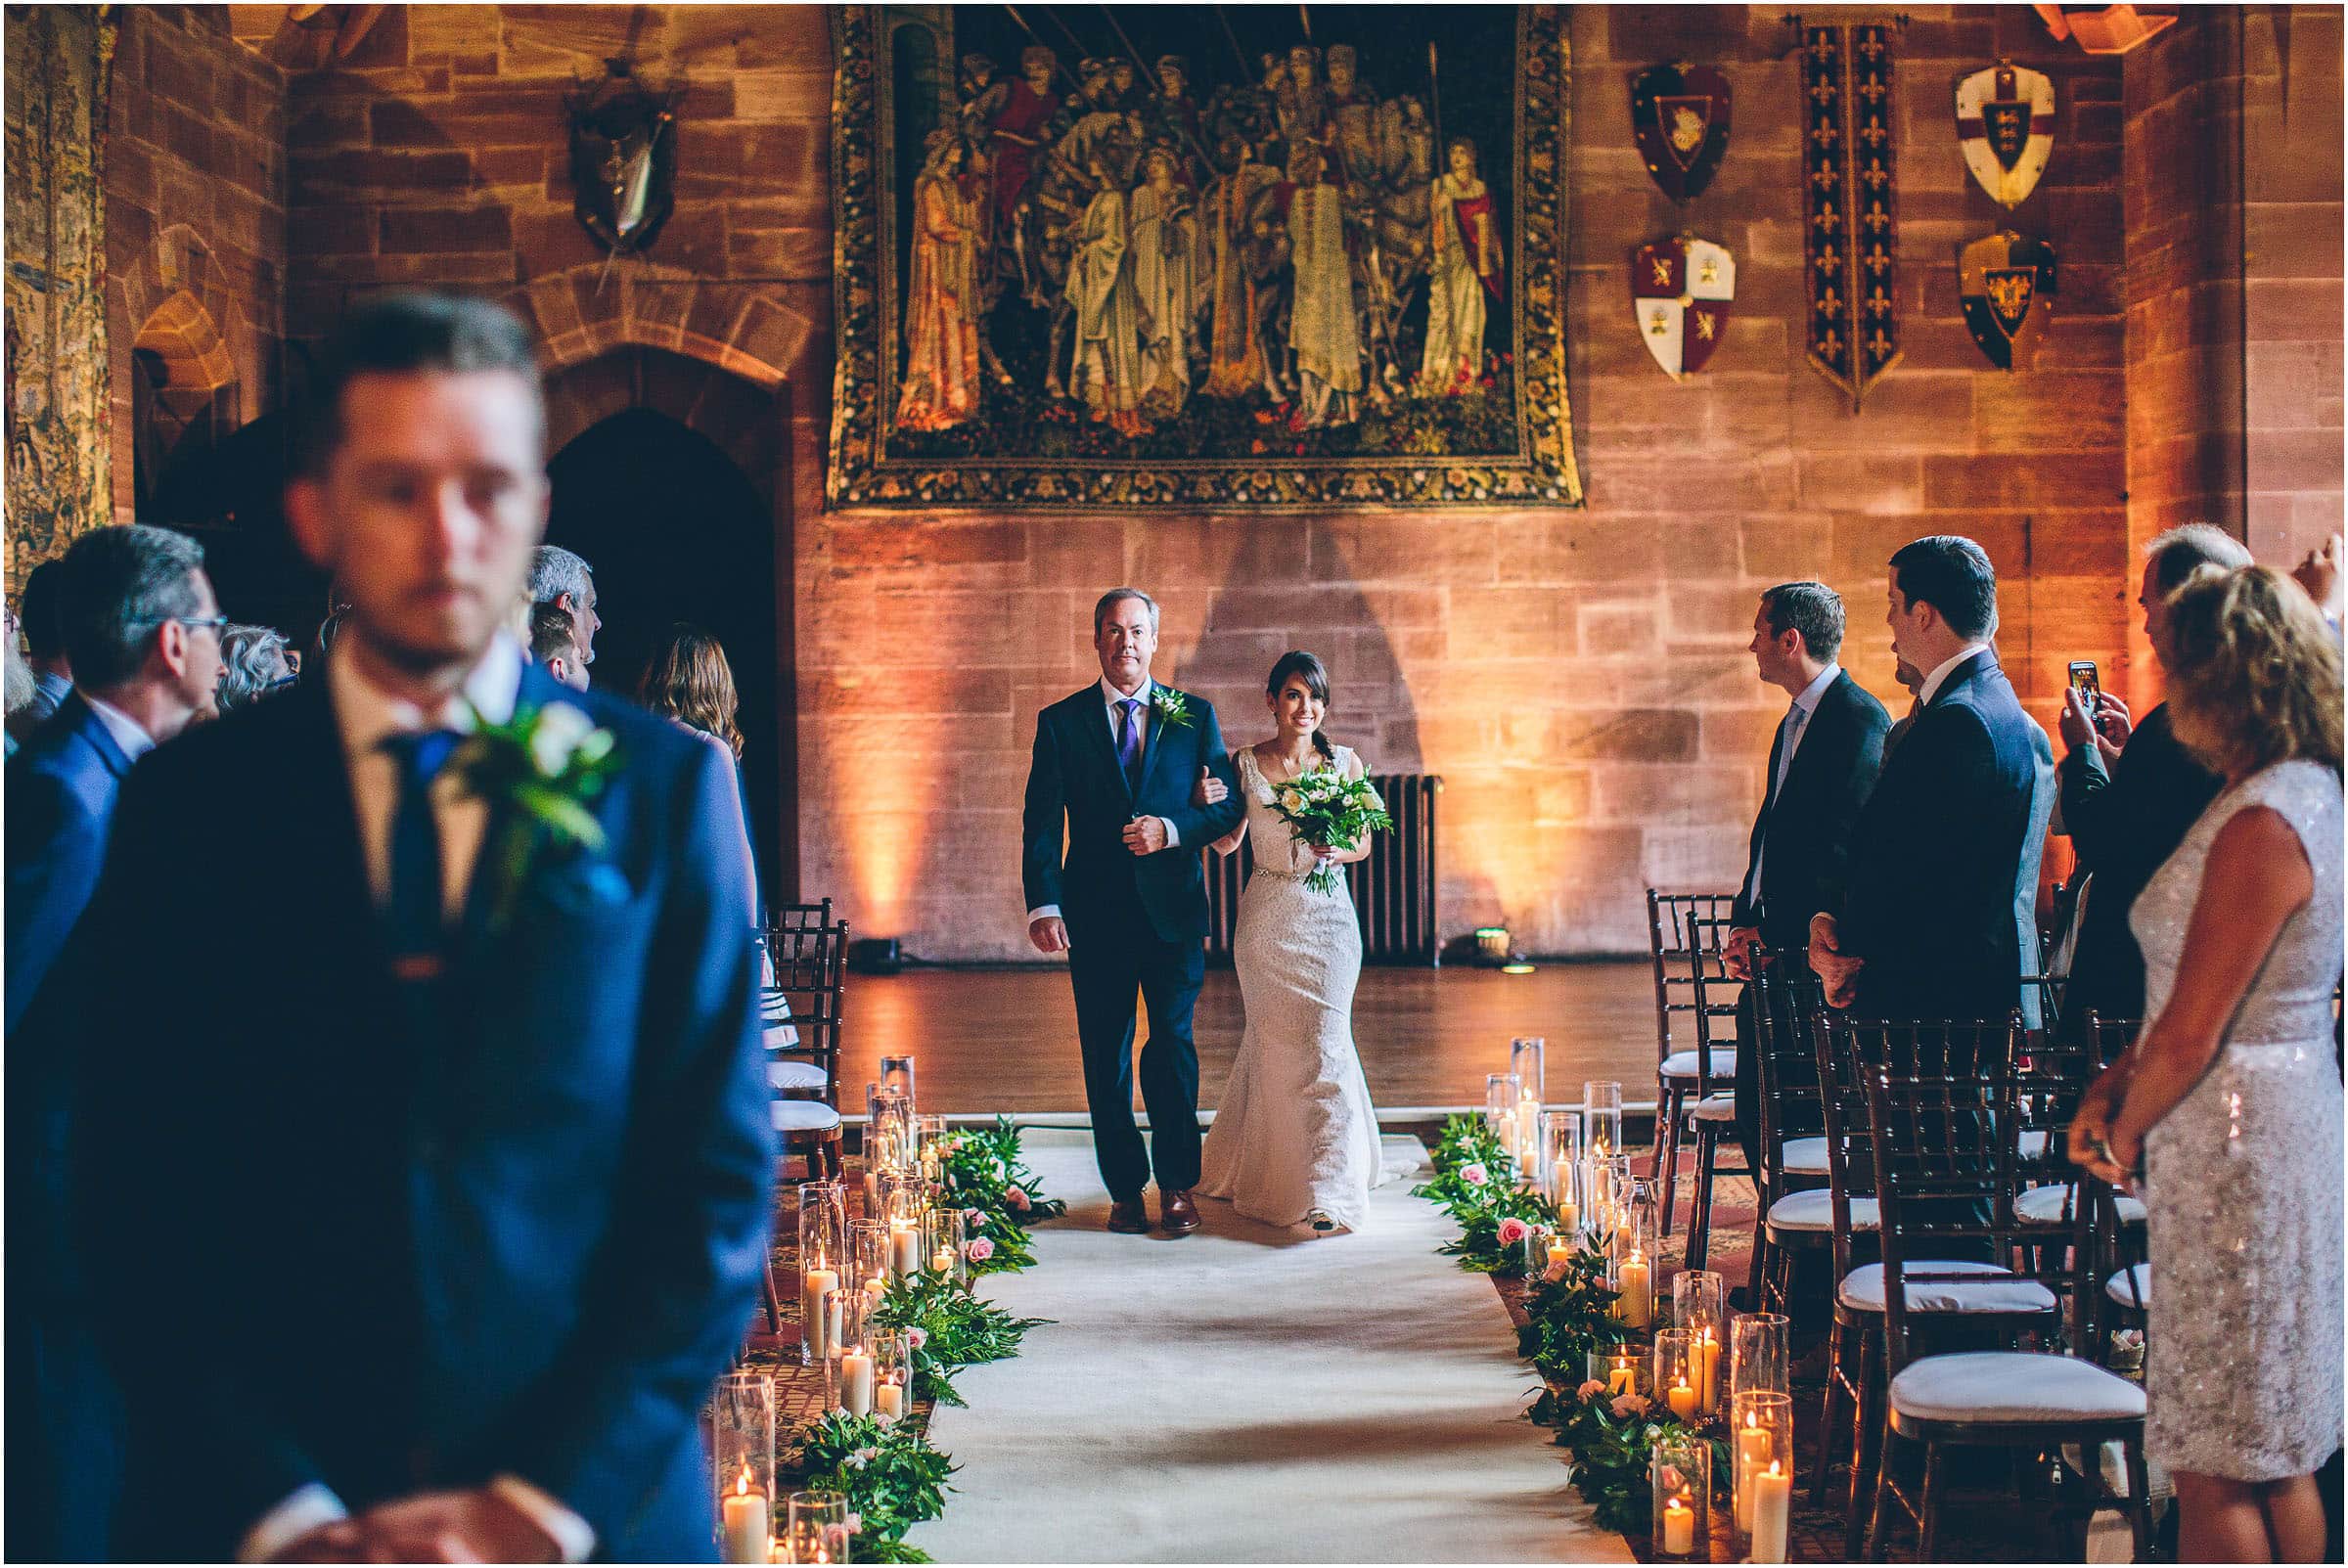 A bride walks down the candlelit aisle at Peckforton Castle while the groom waits at the altar. Guests turn to face her